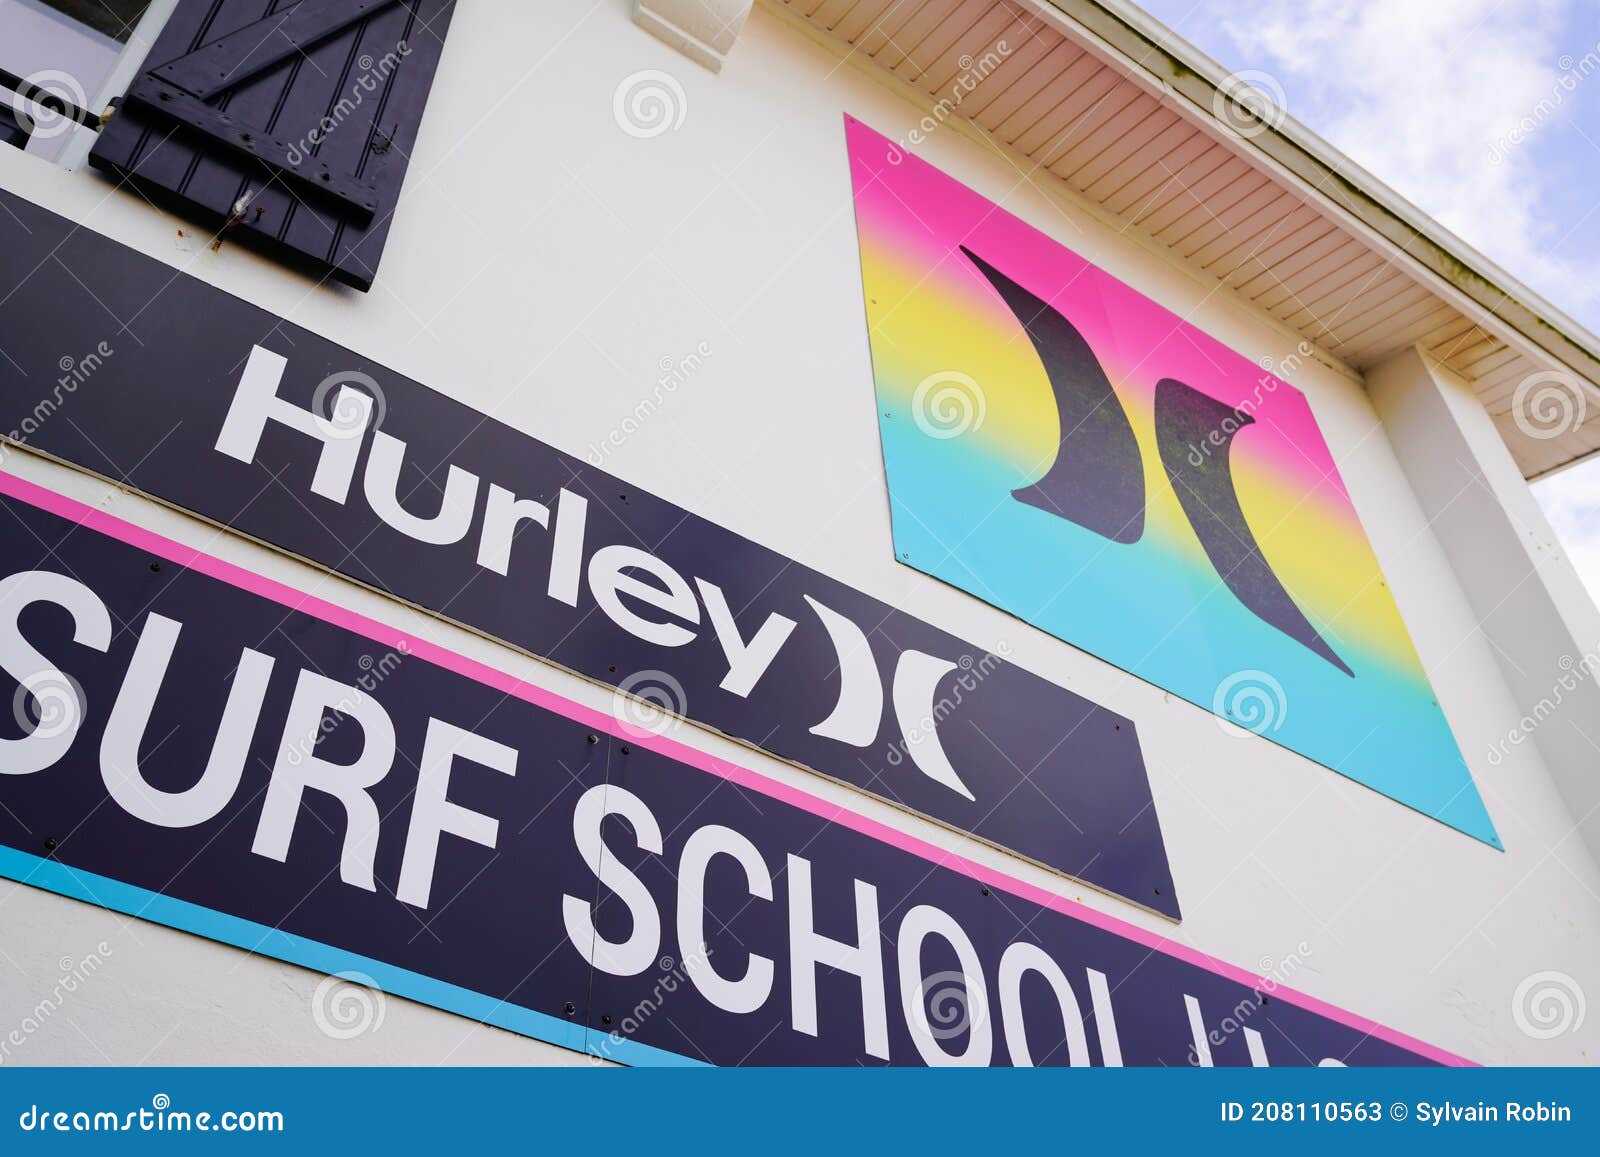 Hurley Logo Brand and Text Sign Store Front of Fashion Clothing